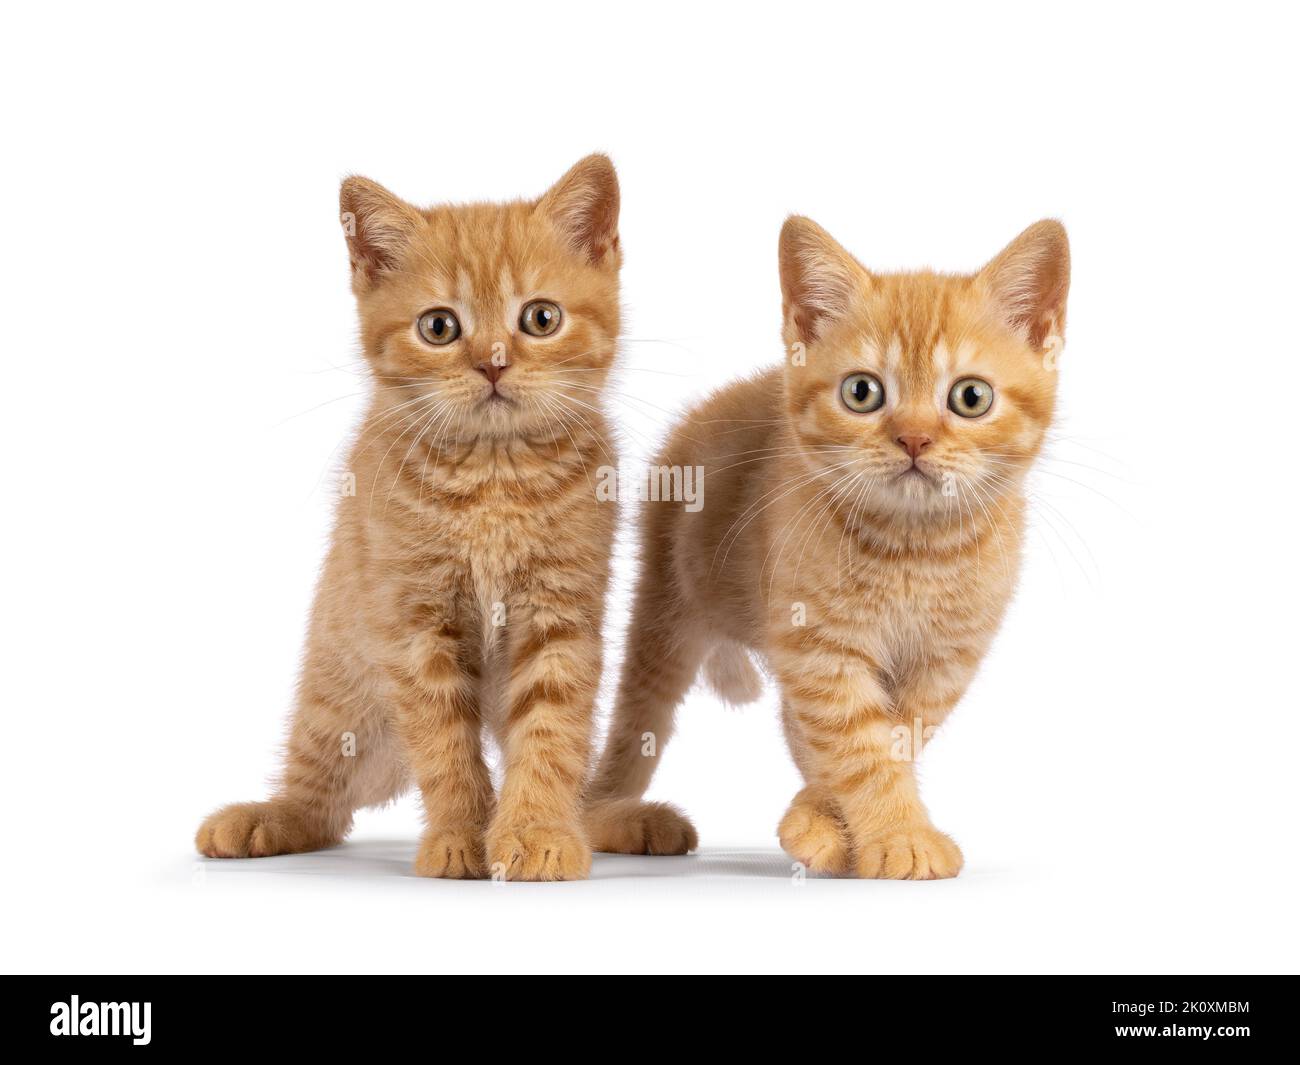 2 Red British Shorthair cat kittens, standing beside each other facing camara. Both looking straight to camera. Isolated on a white background. Stock Photo